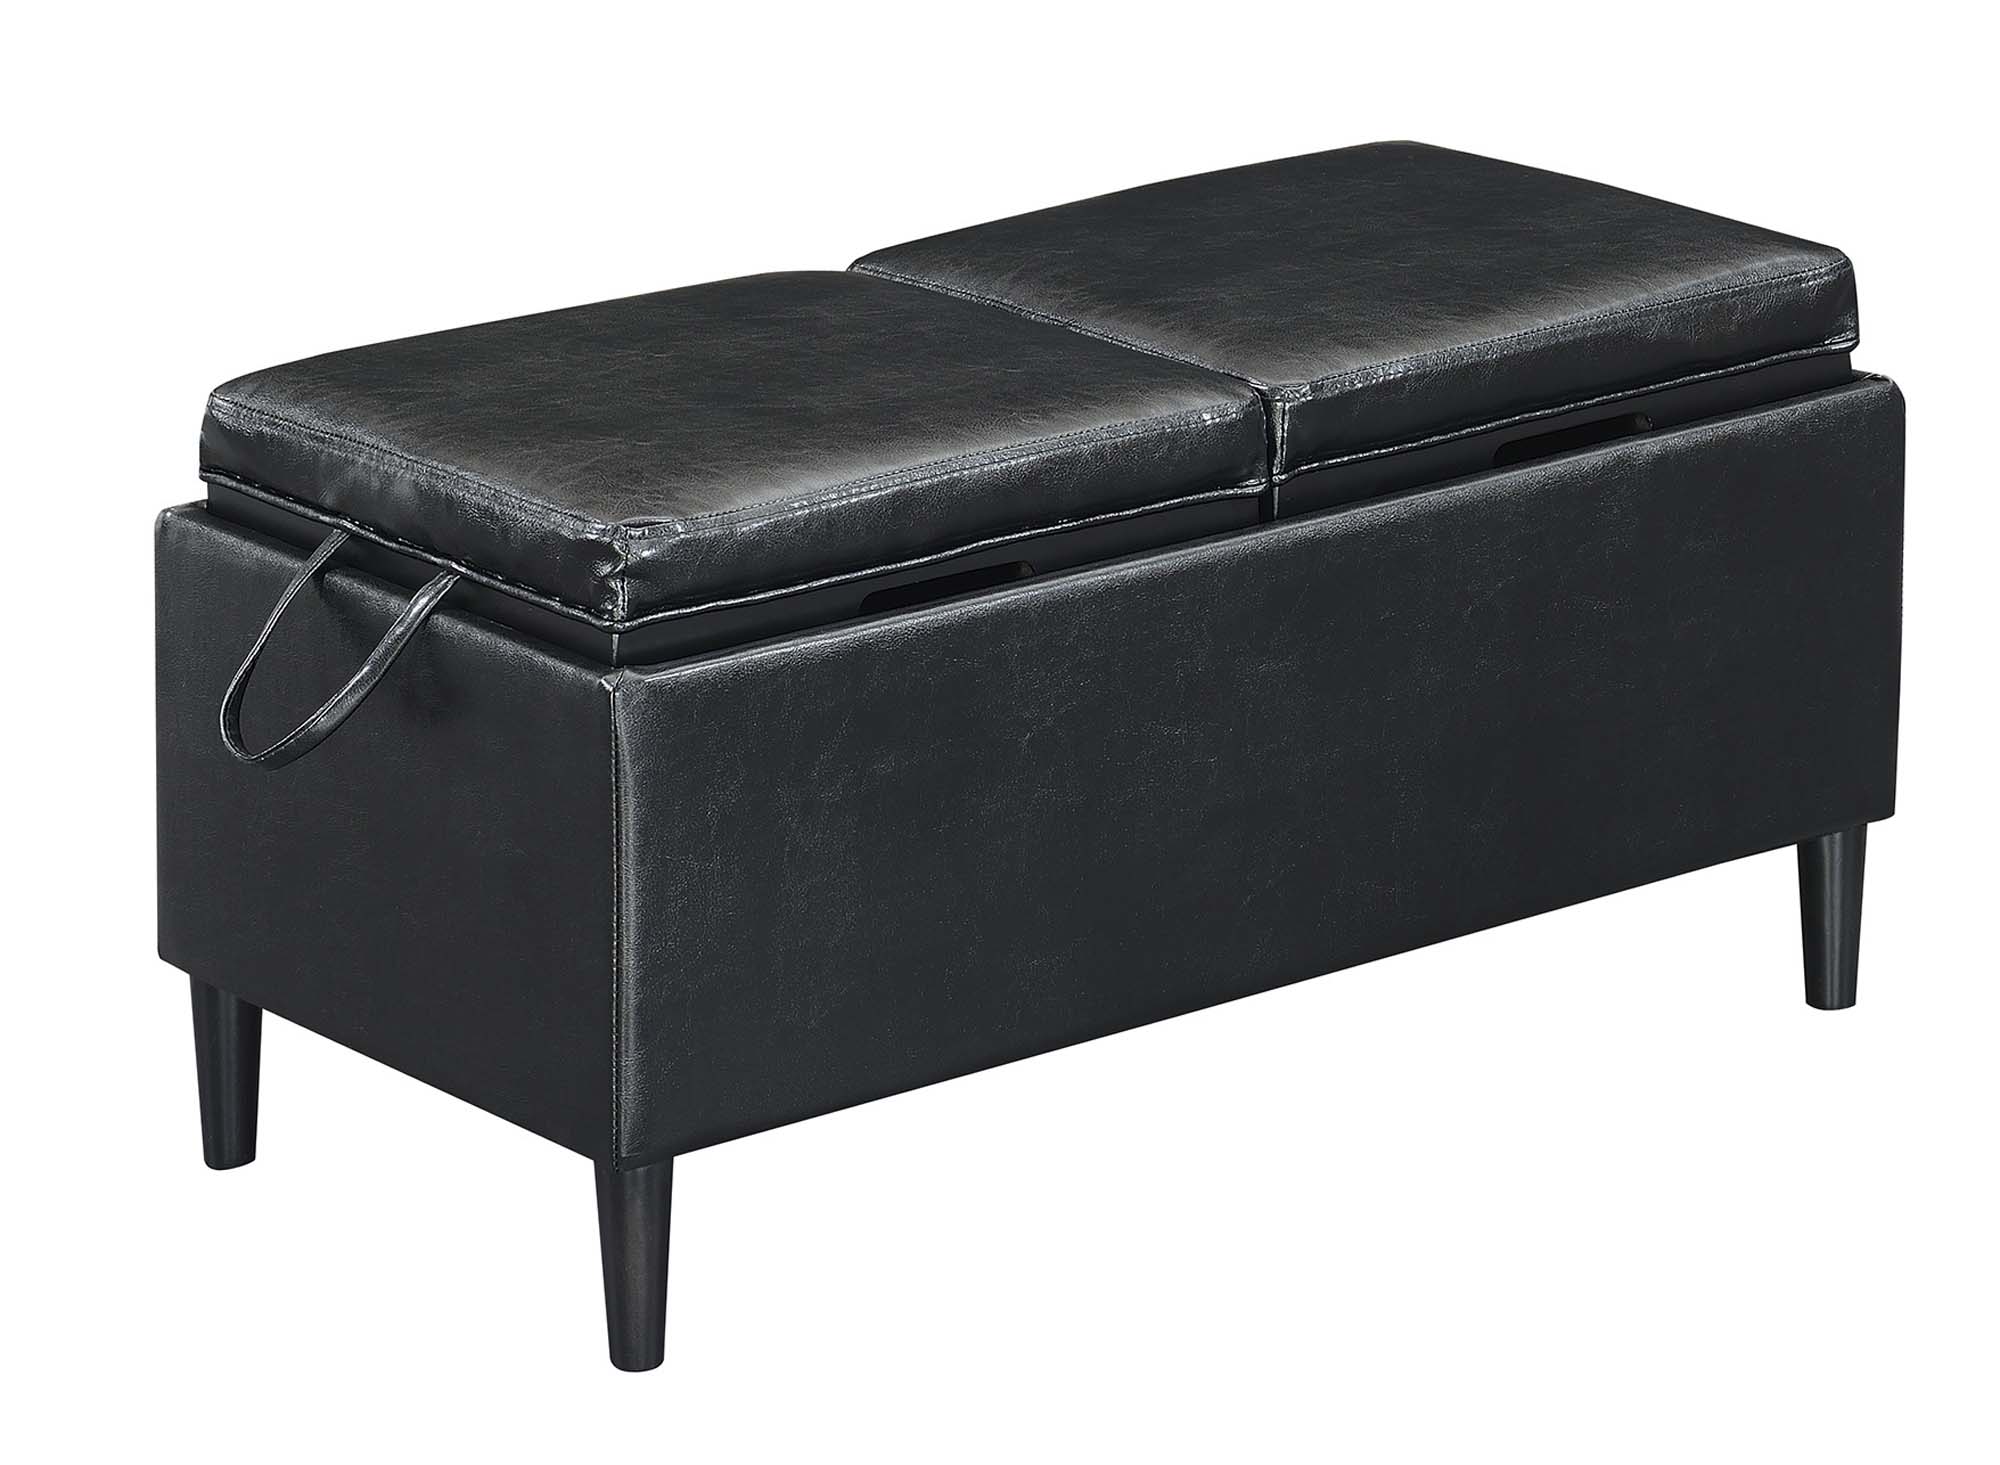 Convenience Concepts Designs4Comfort Magnolia Storage Ottoman with Reversible Trays, Black Faux Leather - image 3 of 4